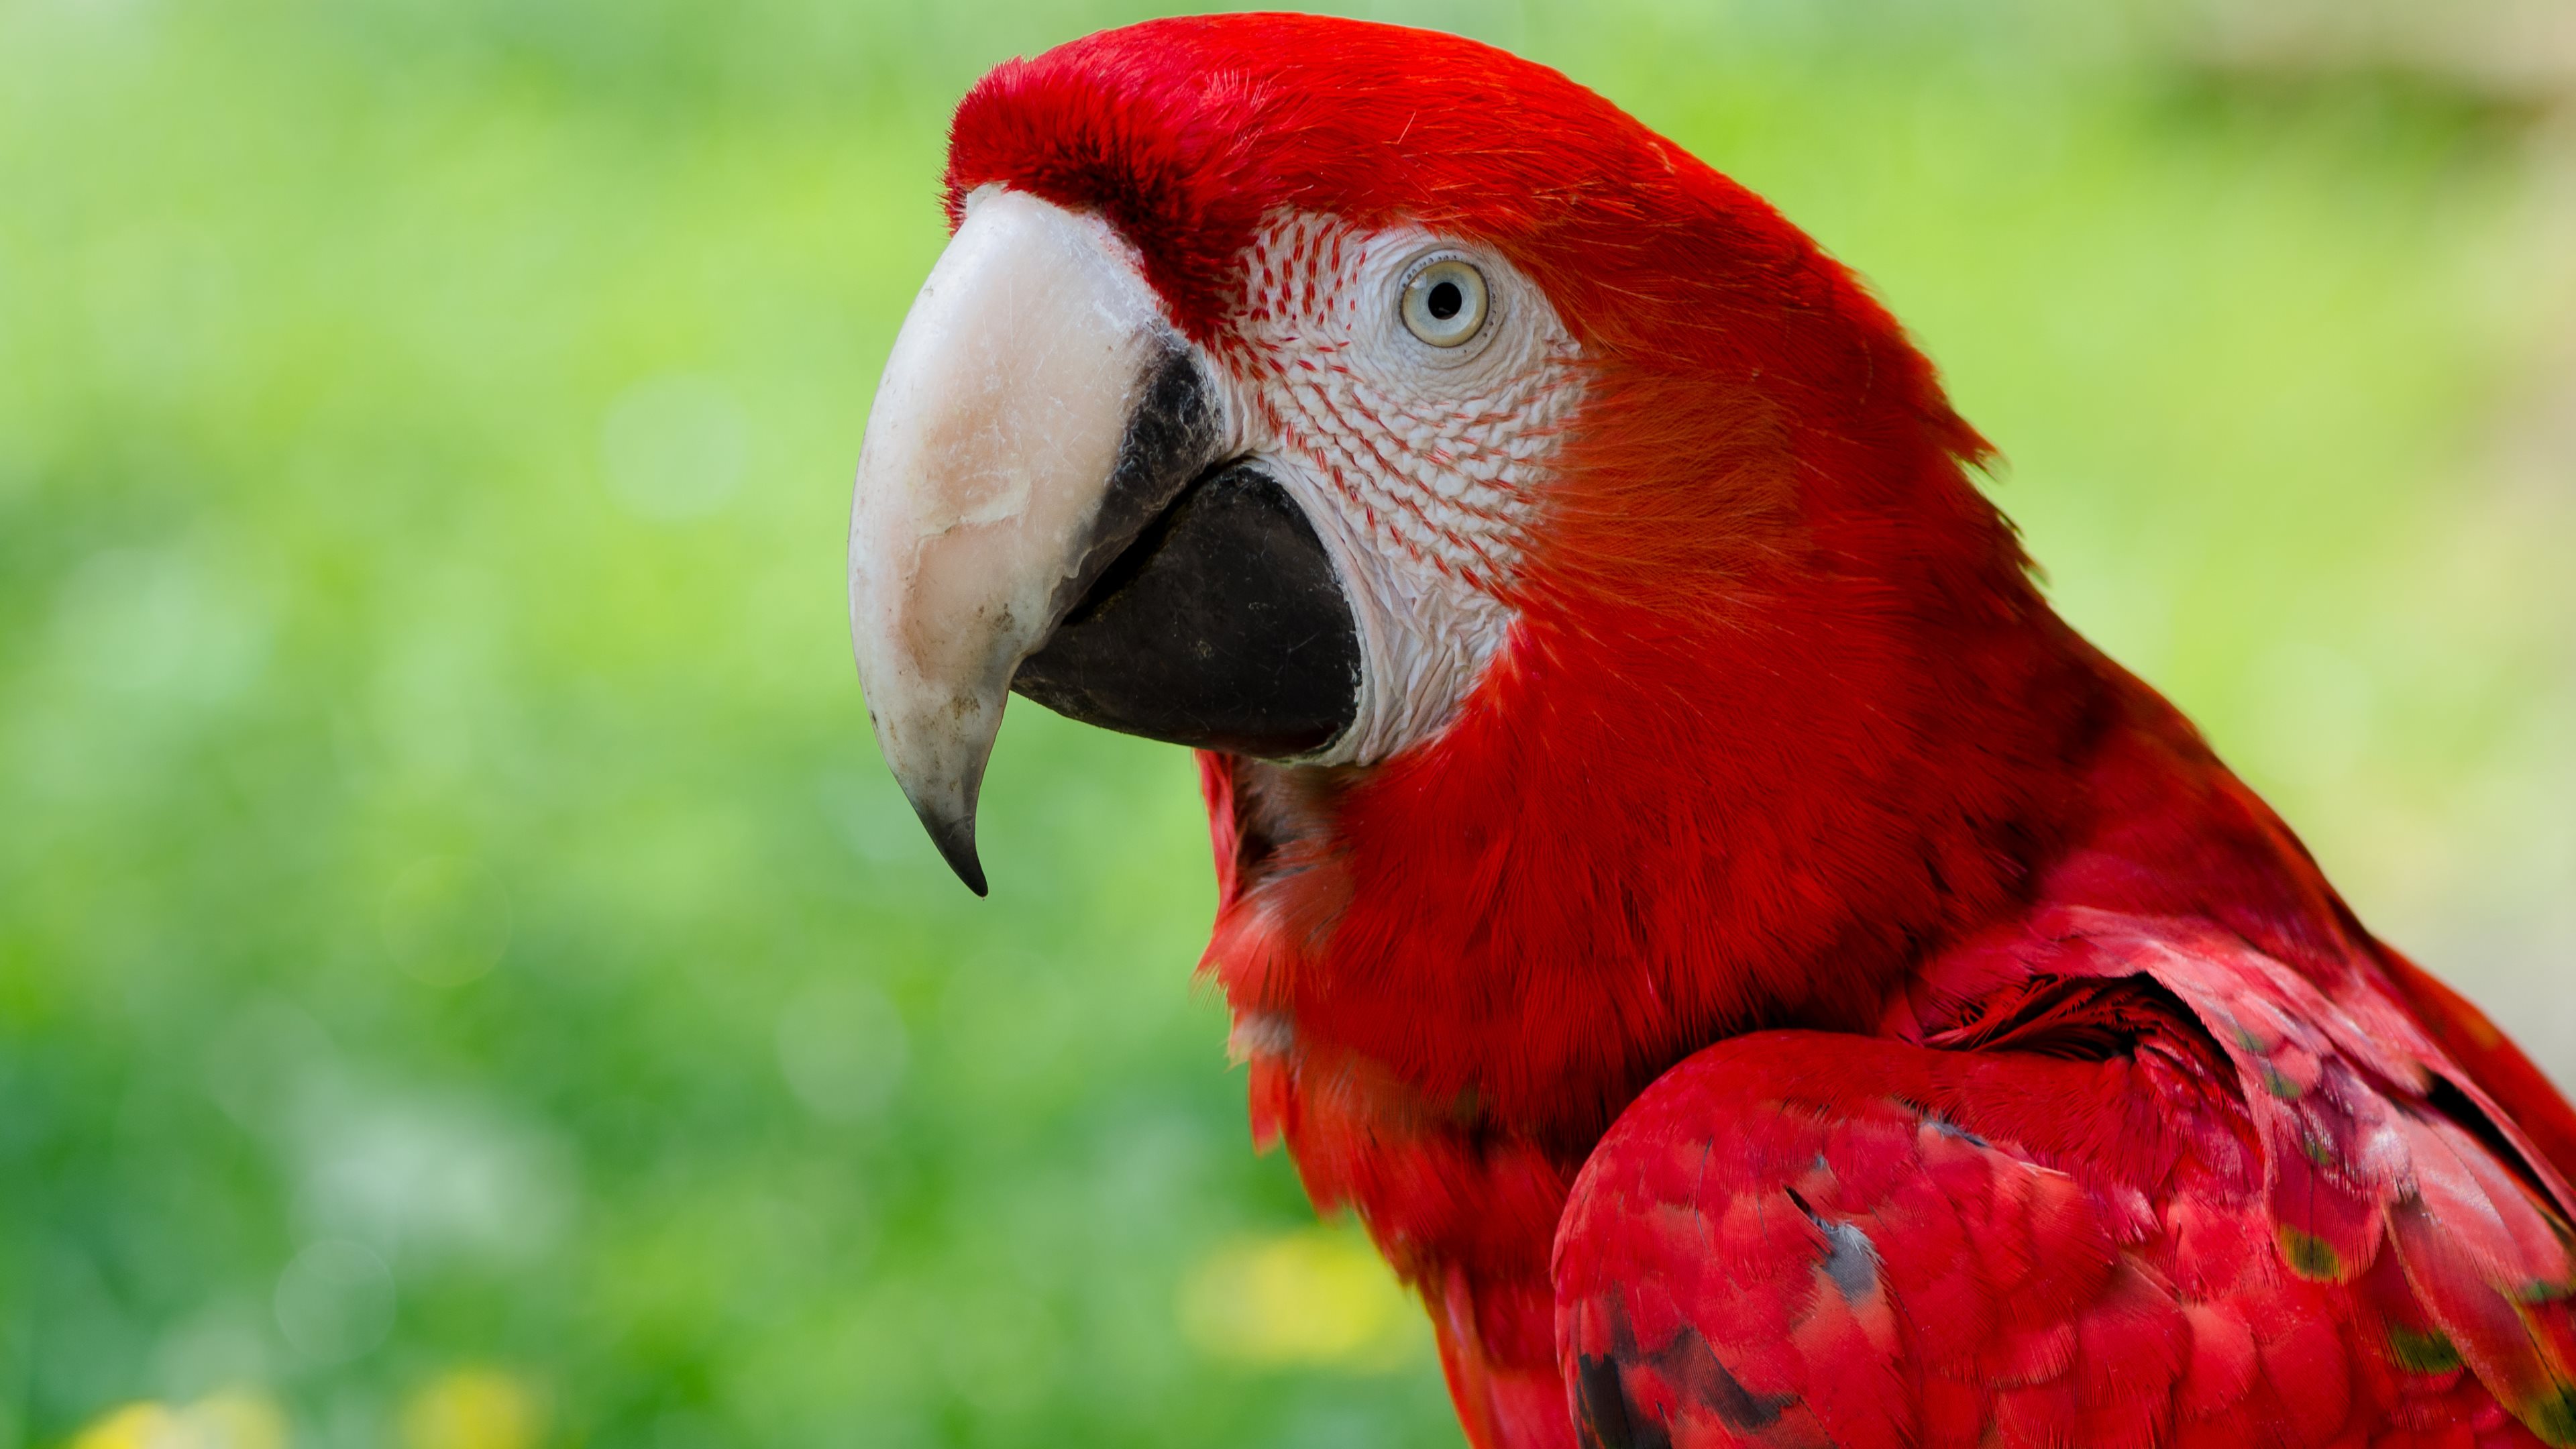 250+ Parrot HD Wallpapers and Backgrounds